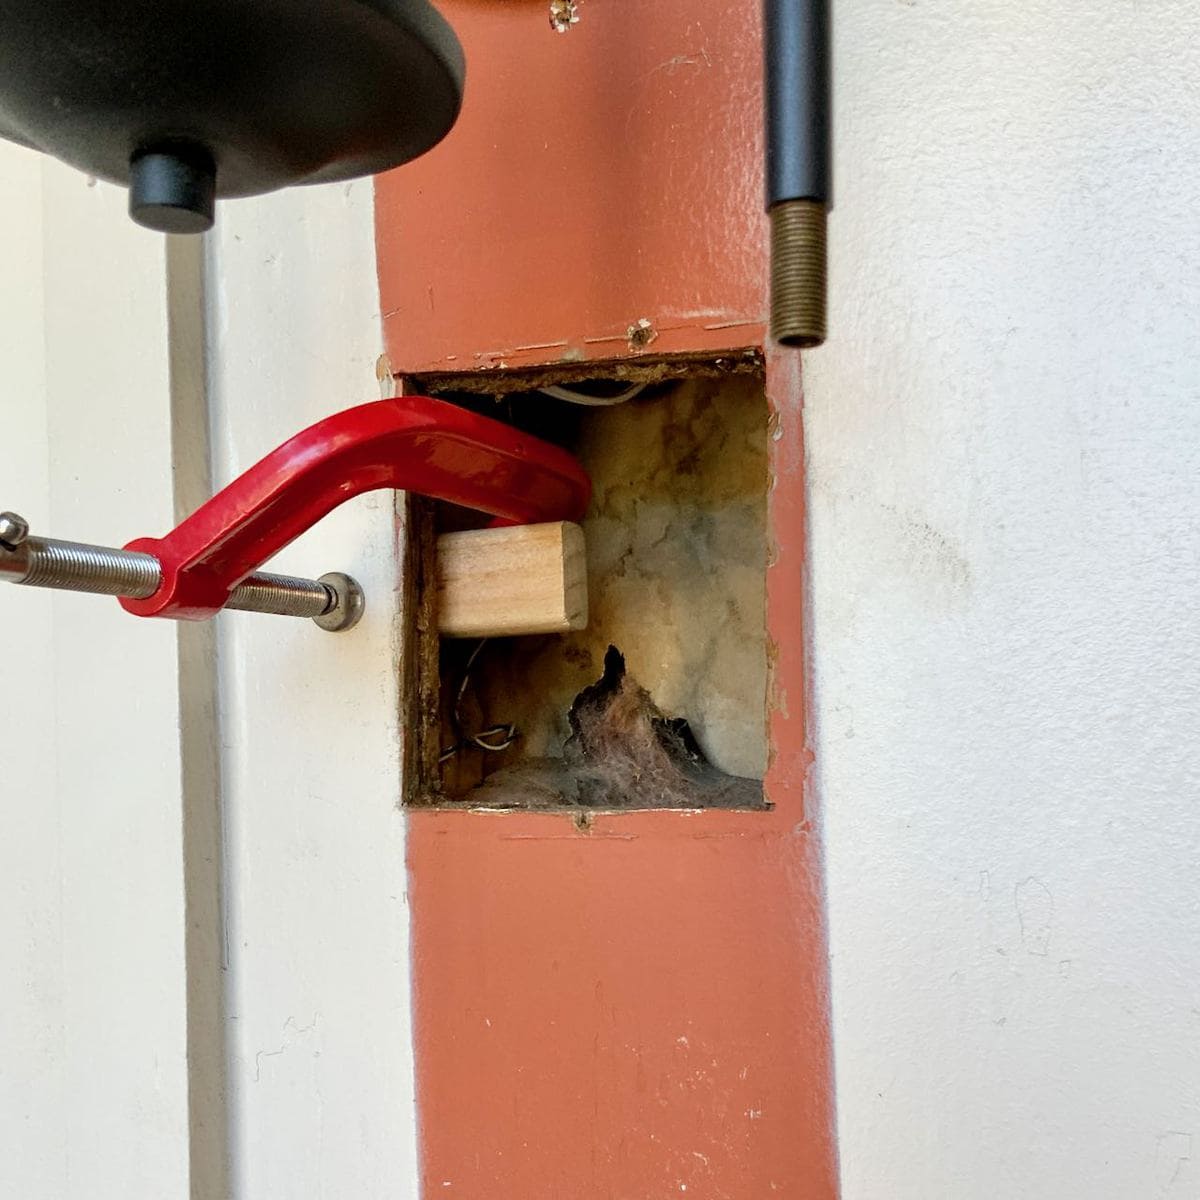 The hole with a short horizontal support board clamped in place 